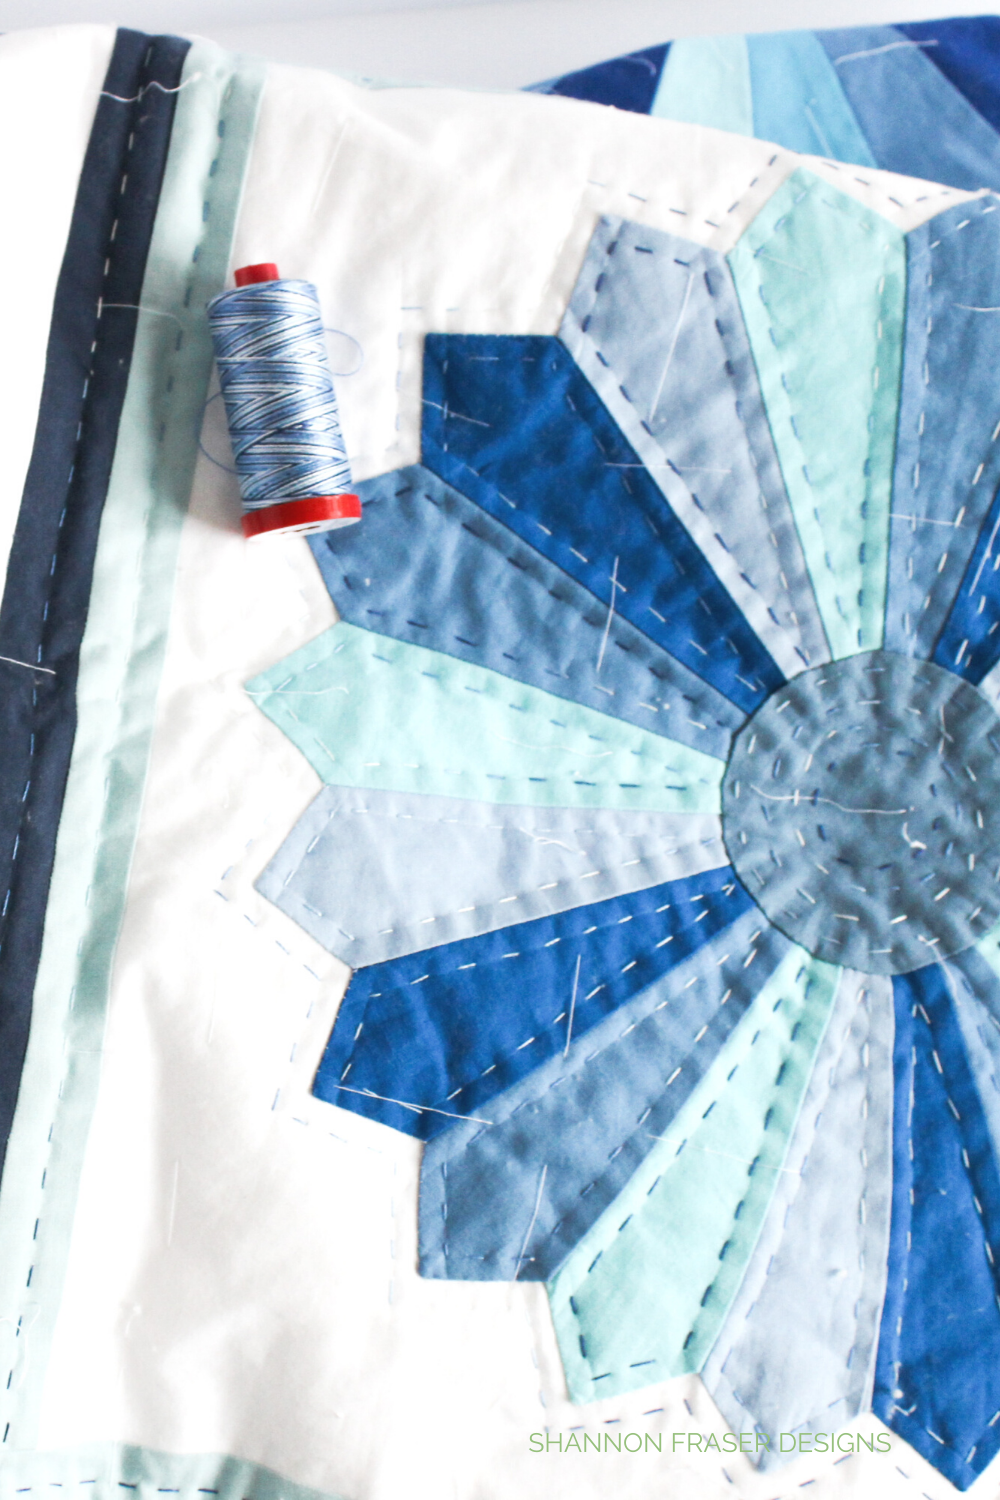 Blue Dresden quilt in process of being hand quilted with Aurifil Thread in 12wt variegated thread | 2019 in Review + 2020 Goals | Shannon Fraser Designs #modernquilter